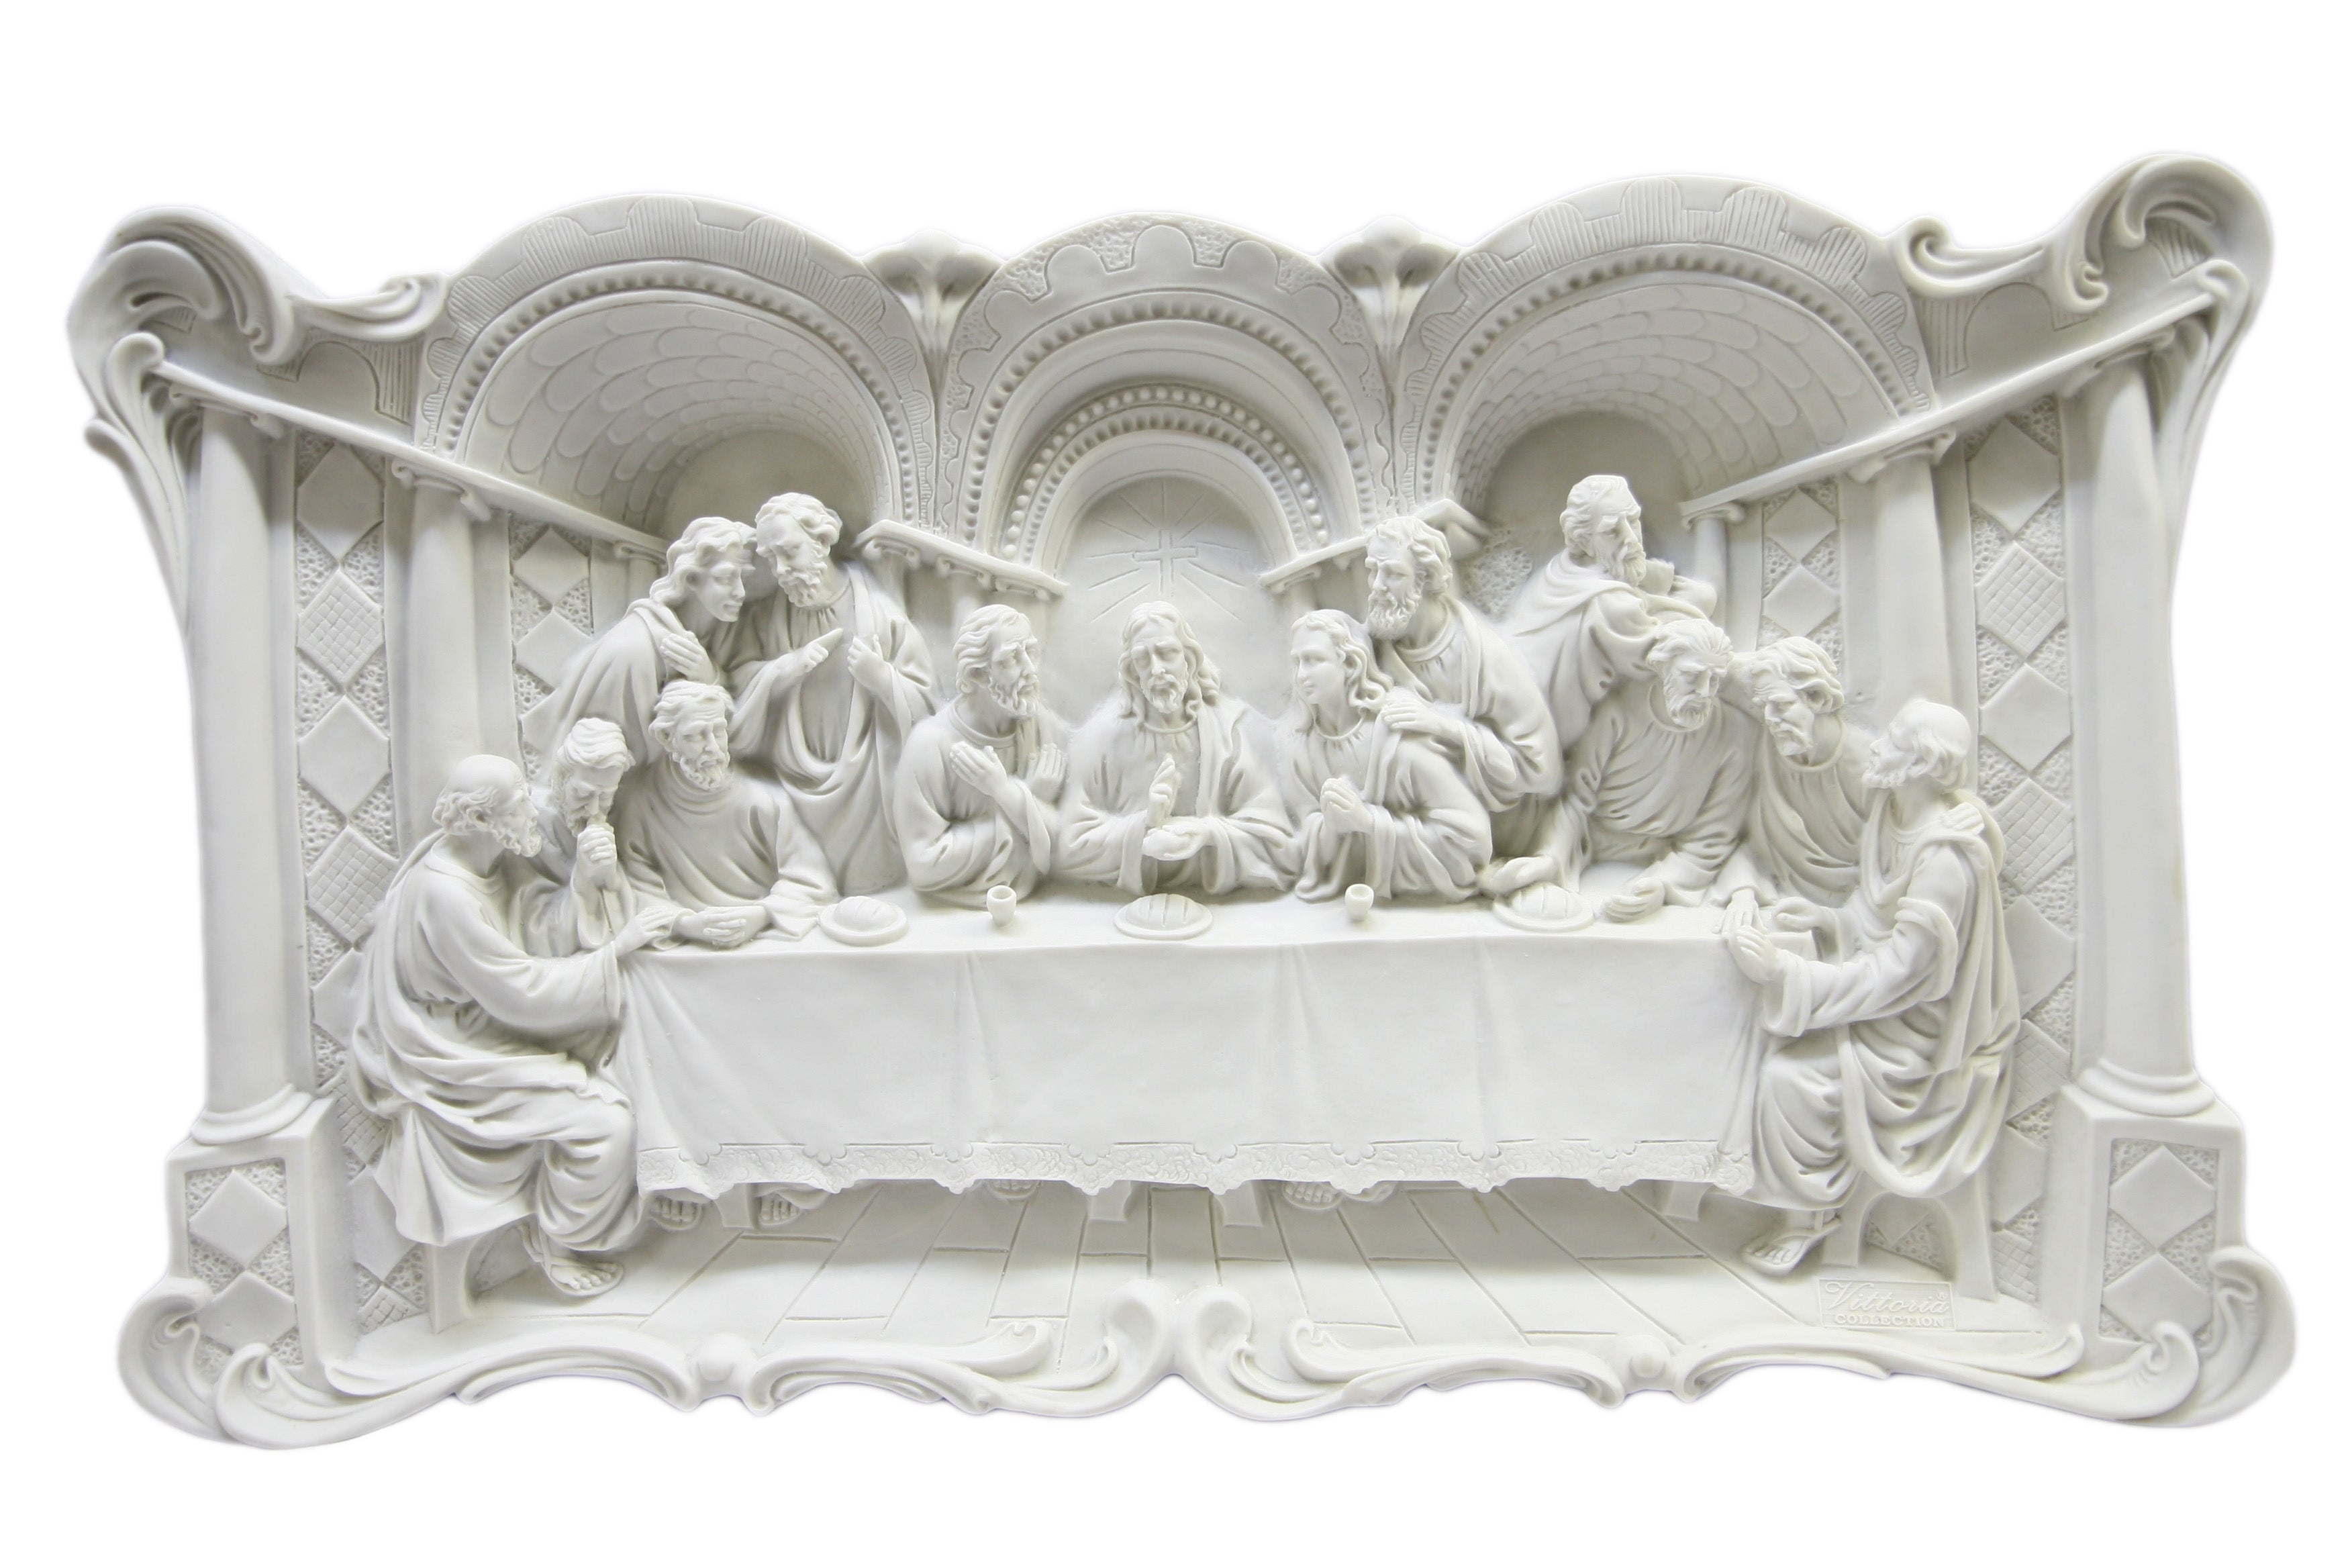 29" x 16" The Last Supper Statue Wall Hanging Plate Catholic Religious 3D Sculpture Vittoria Collection